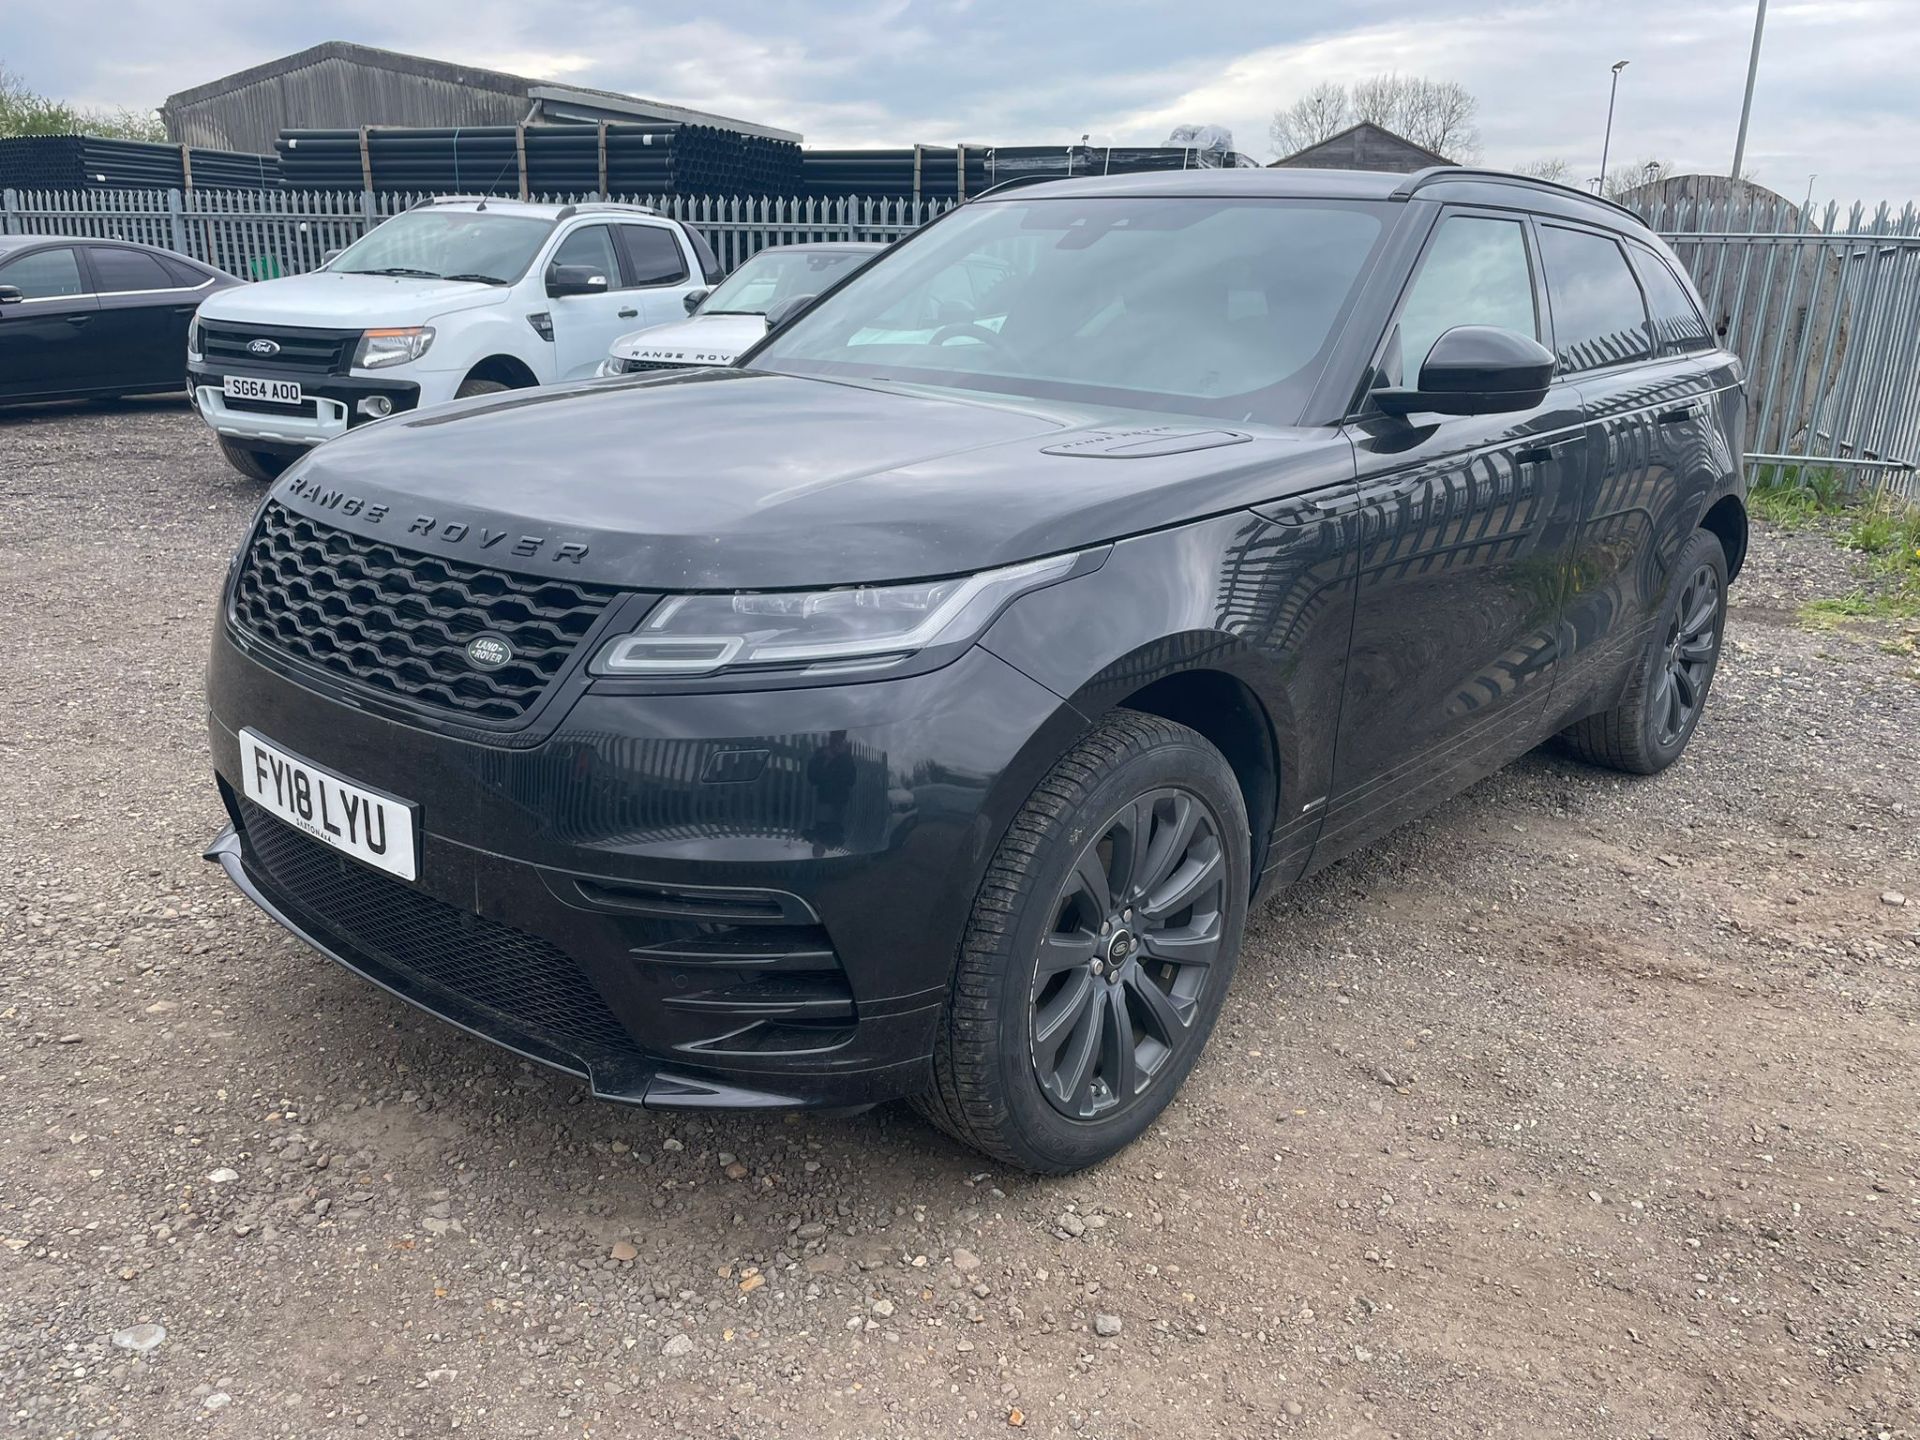 Land Rover Range Rover Velar 2.0 D240 R-Dynamic S 2018 '18 Reg' 4WD - Panoramic Roof- ULEZ Compliant - Image 3 of 33